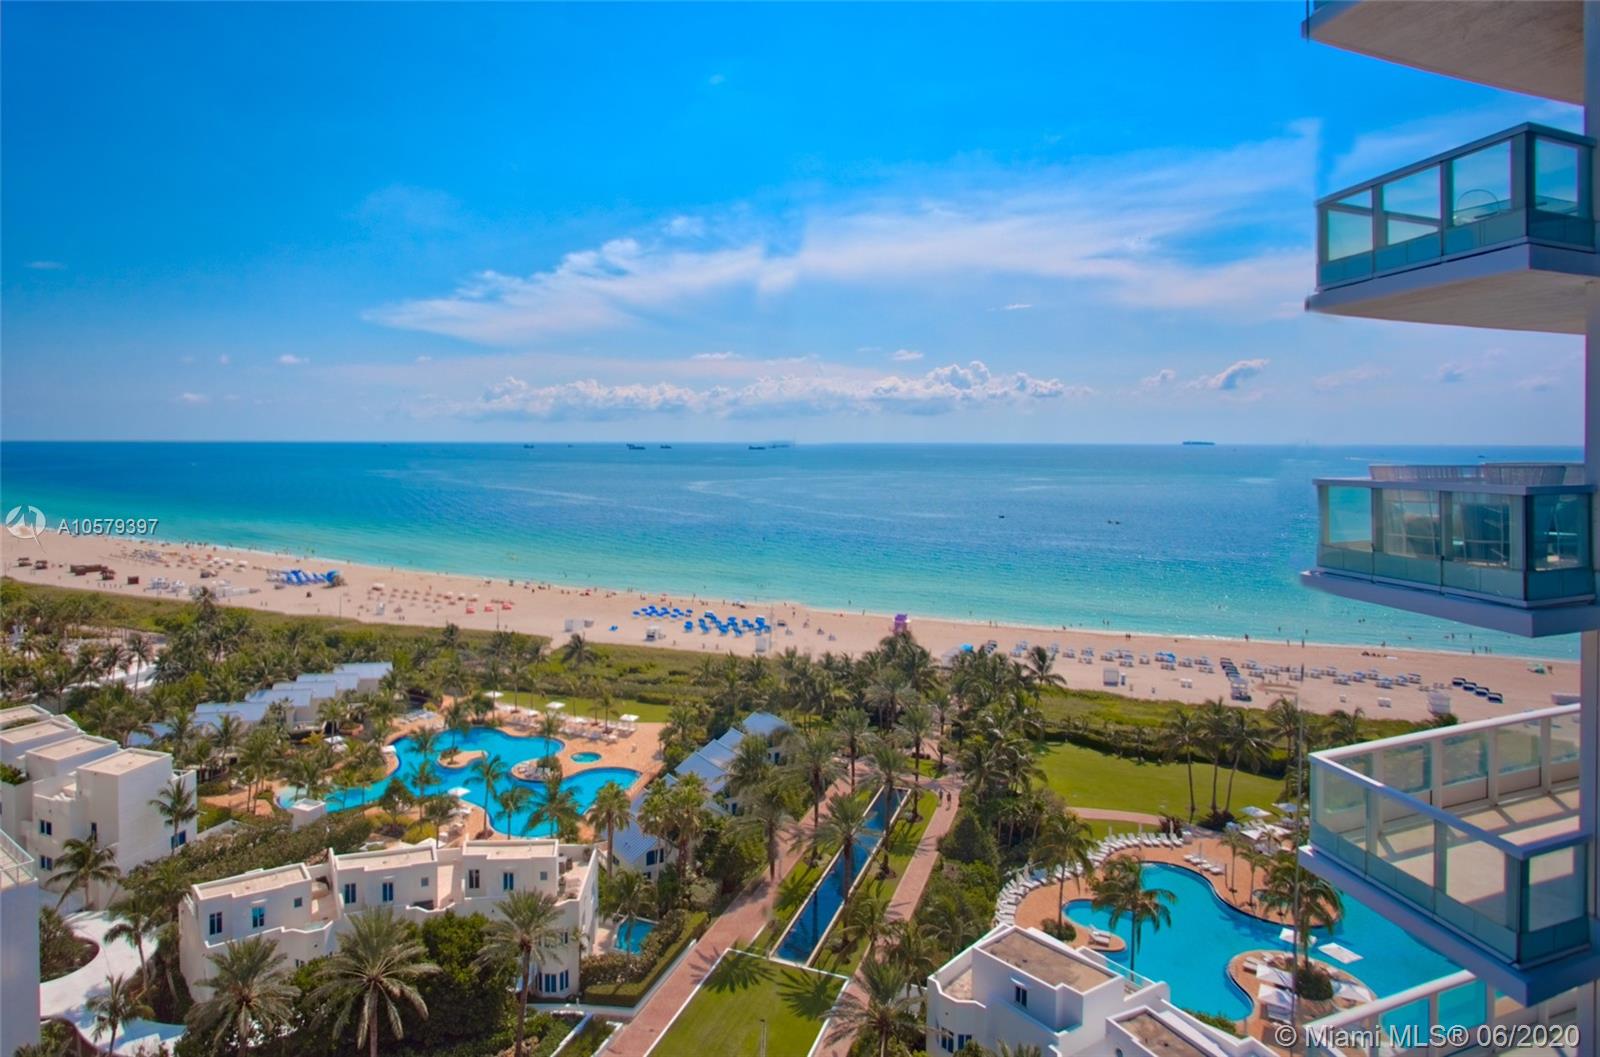 Spacious 3 bedroom and 3 bath in the highly sought after Continuum South Tower.This rarely available, both East and West Corner line captures the best of both views, Ocean and Bay; Fisher Island & the Downtown Miami skyline.Renovated unit with hard wood floors in living area & marble baths.Top of the line finishes including electronic blackout shades & surround sound throughout. Amenities include Oceanfront restaurant, 3 tennis courts, 25,000 sq ft luxury spa,beach & towel service,5 star concierge & more